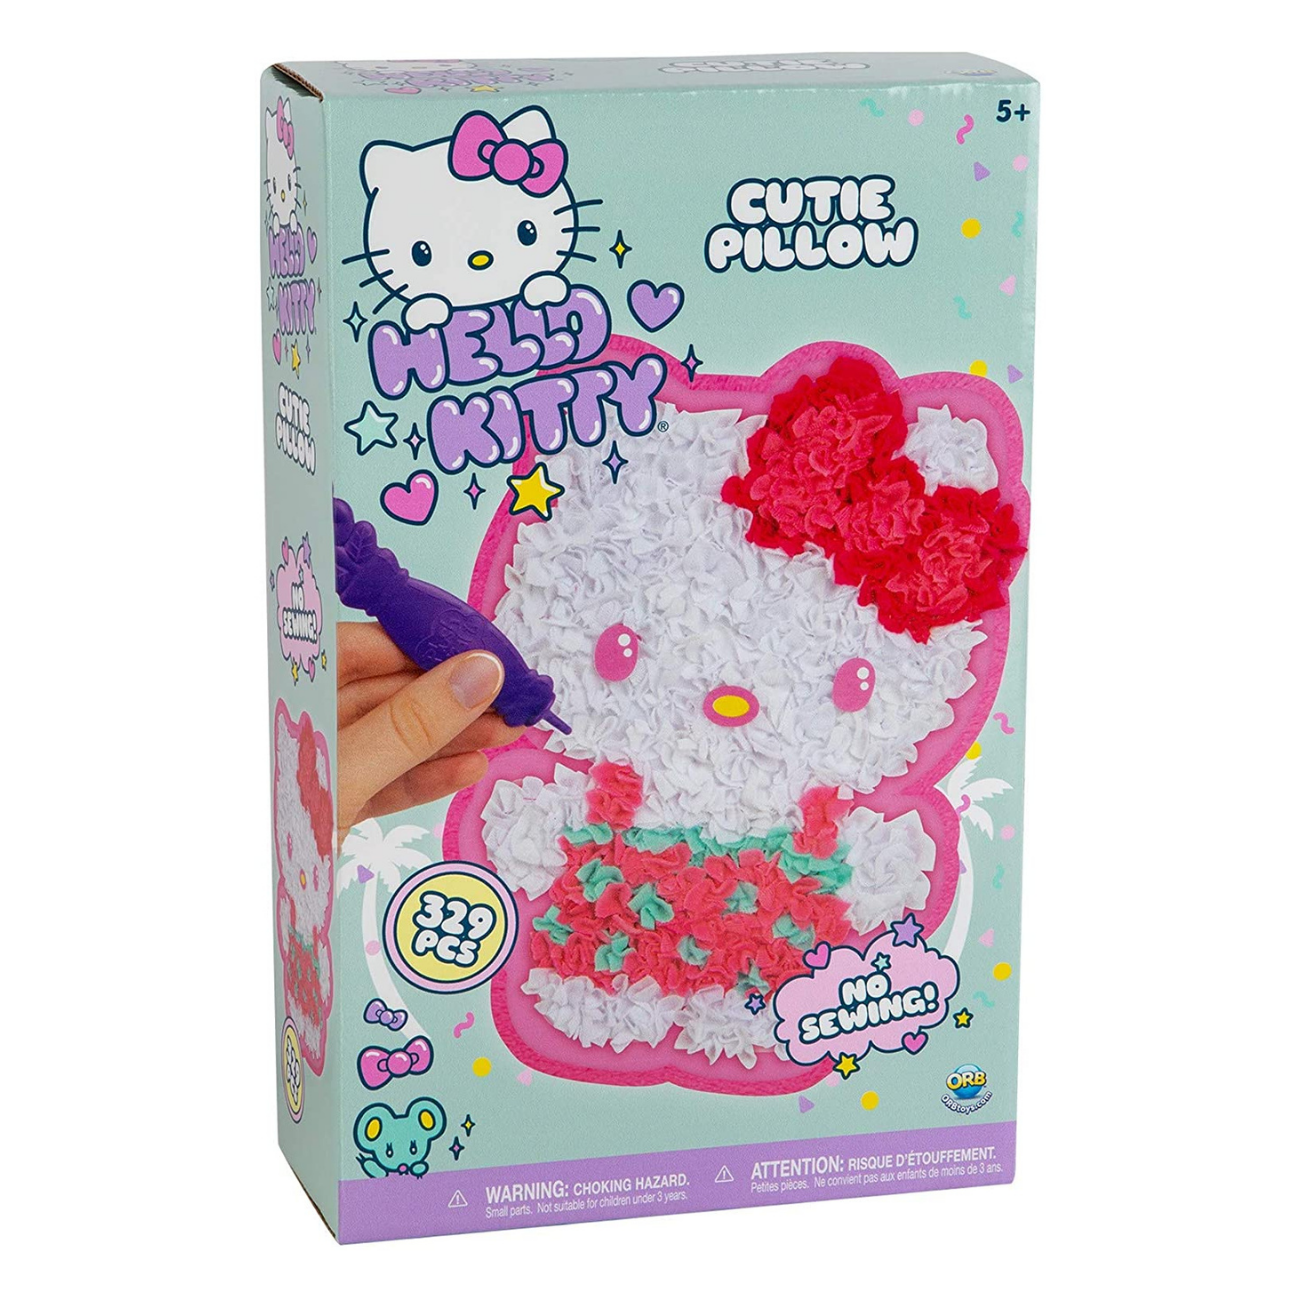 Keycraft Whoopee Cushion Carded Craft Kit Pink Online UAE, Buy Soft Toys  for (2-3Years) at  - 482b2aebd83a9